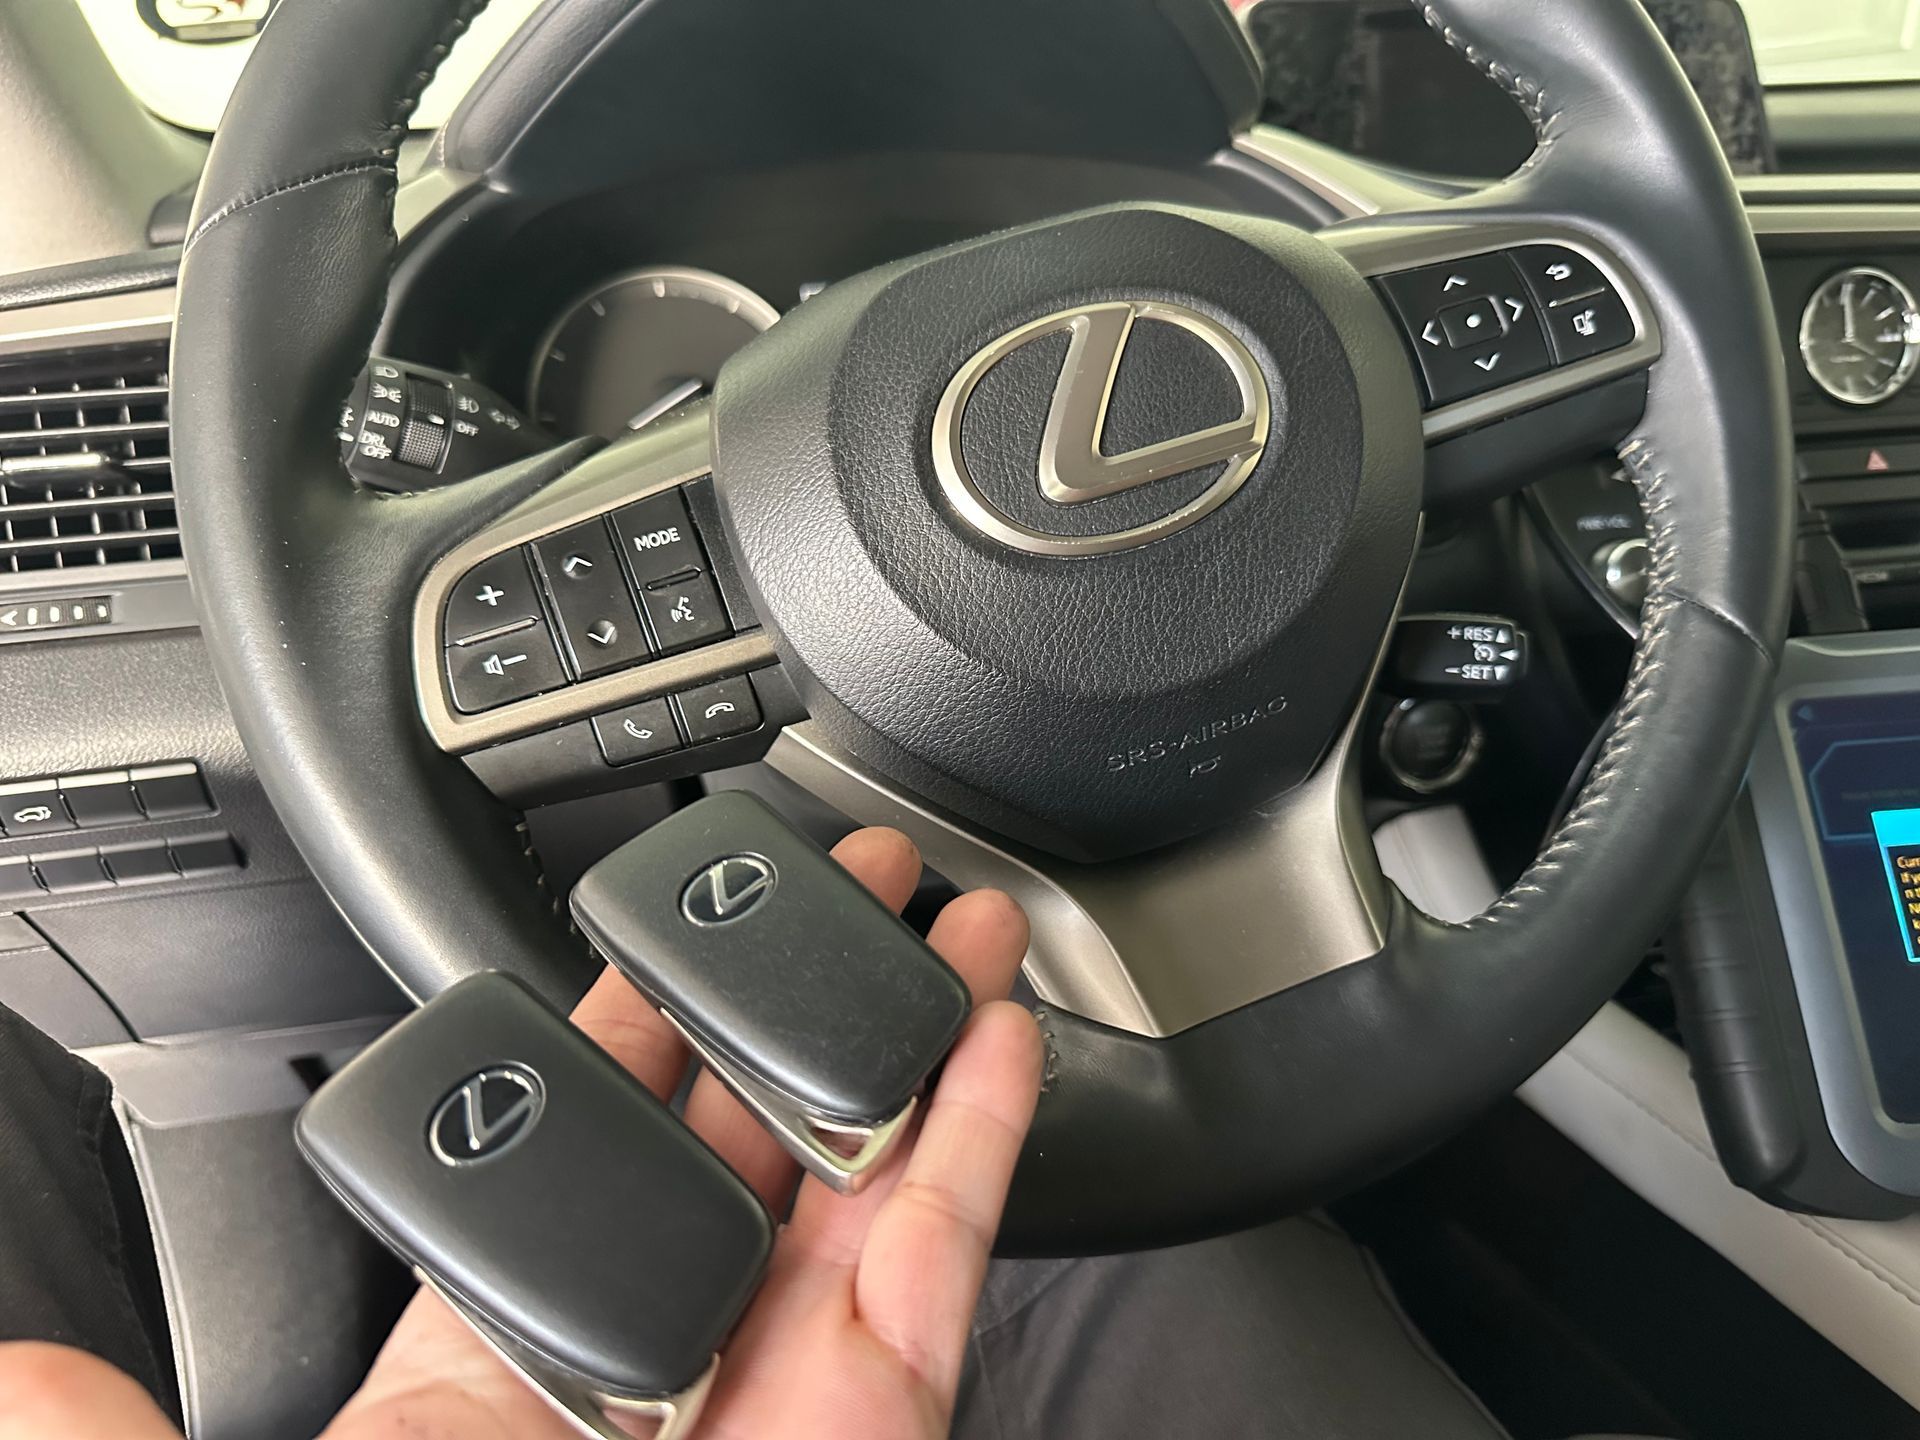 a hand holding a vehicle remote in front of a steering wheel